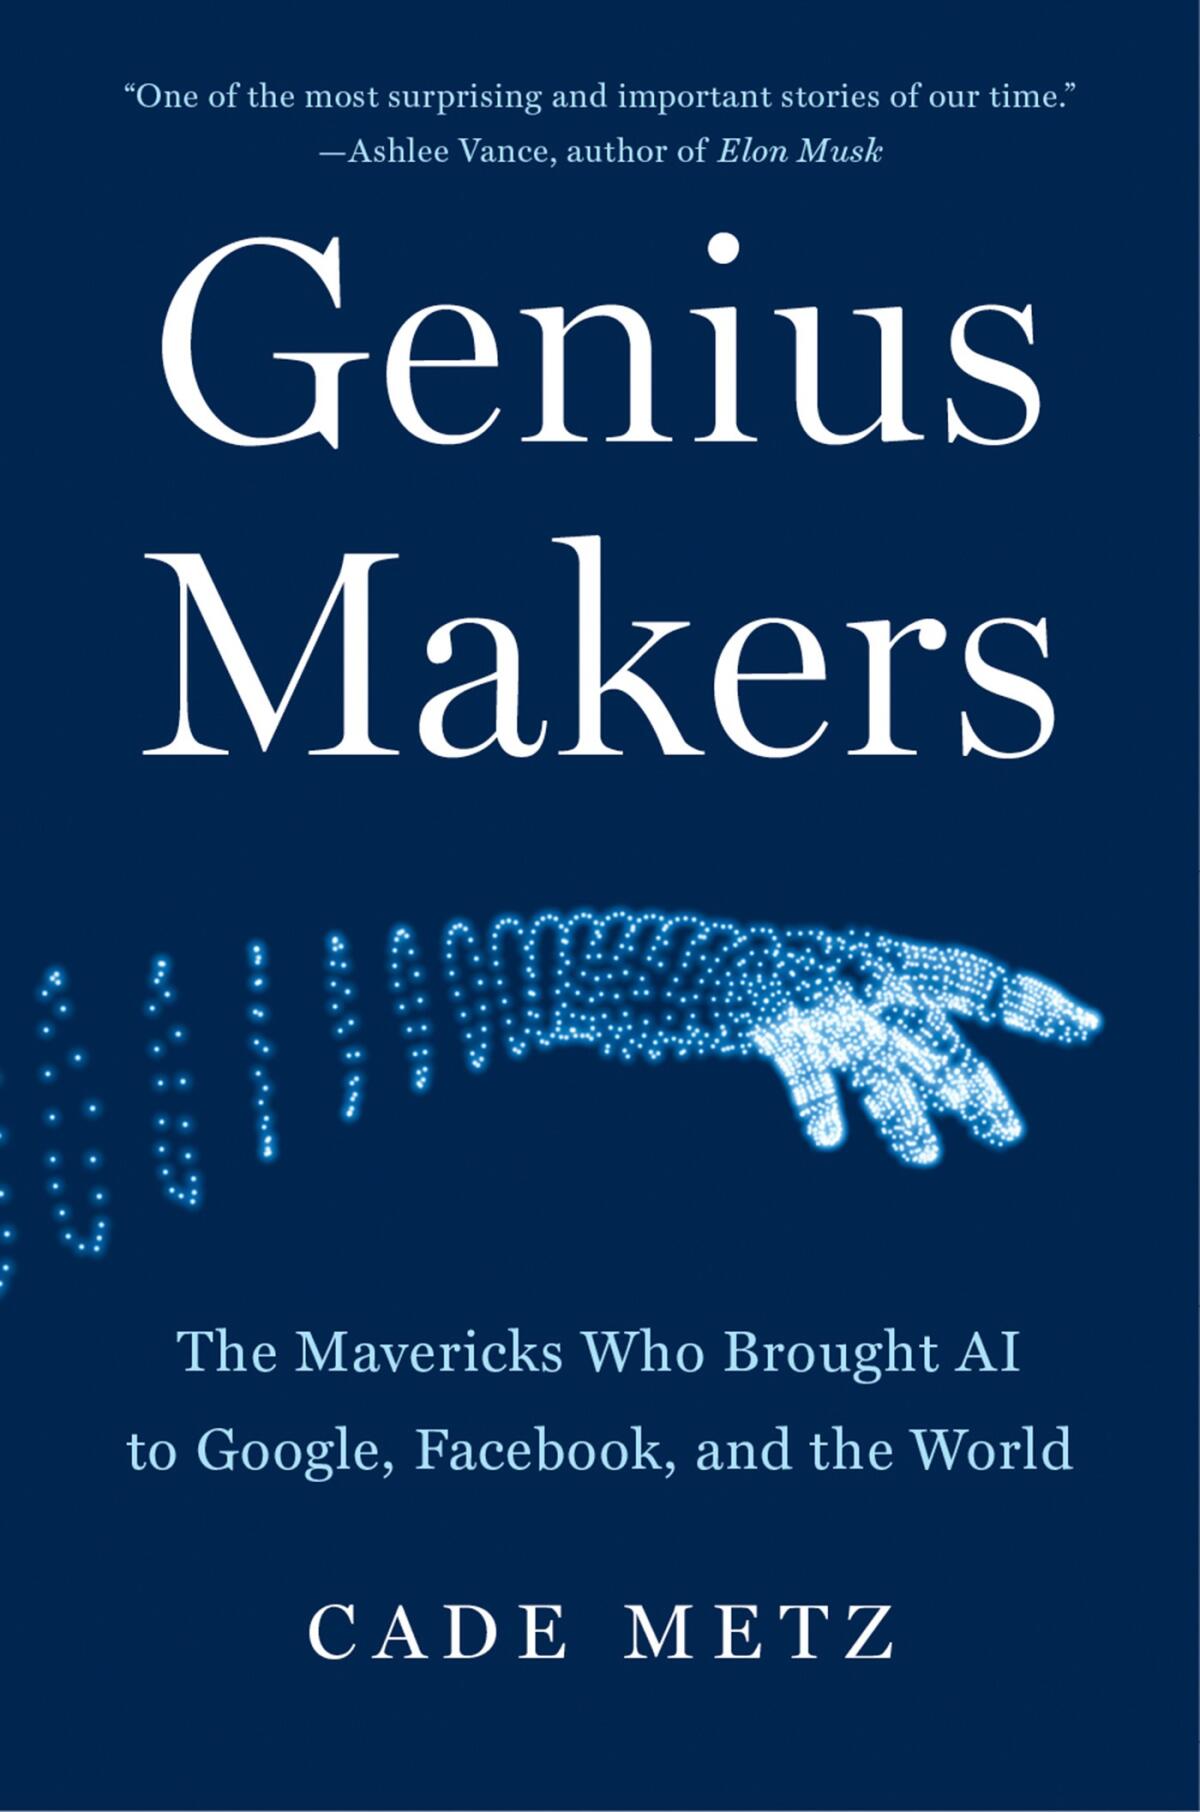 "Genius Makers: The Mavericks Who Brought AI to Google, Facebook, and the World," by Cade Metz